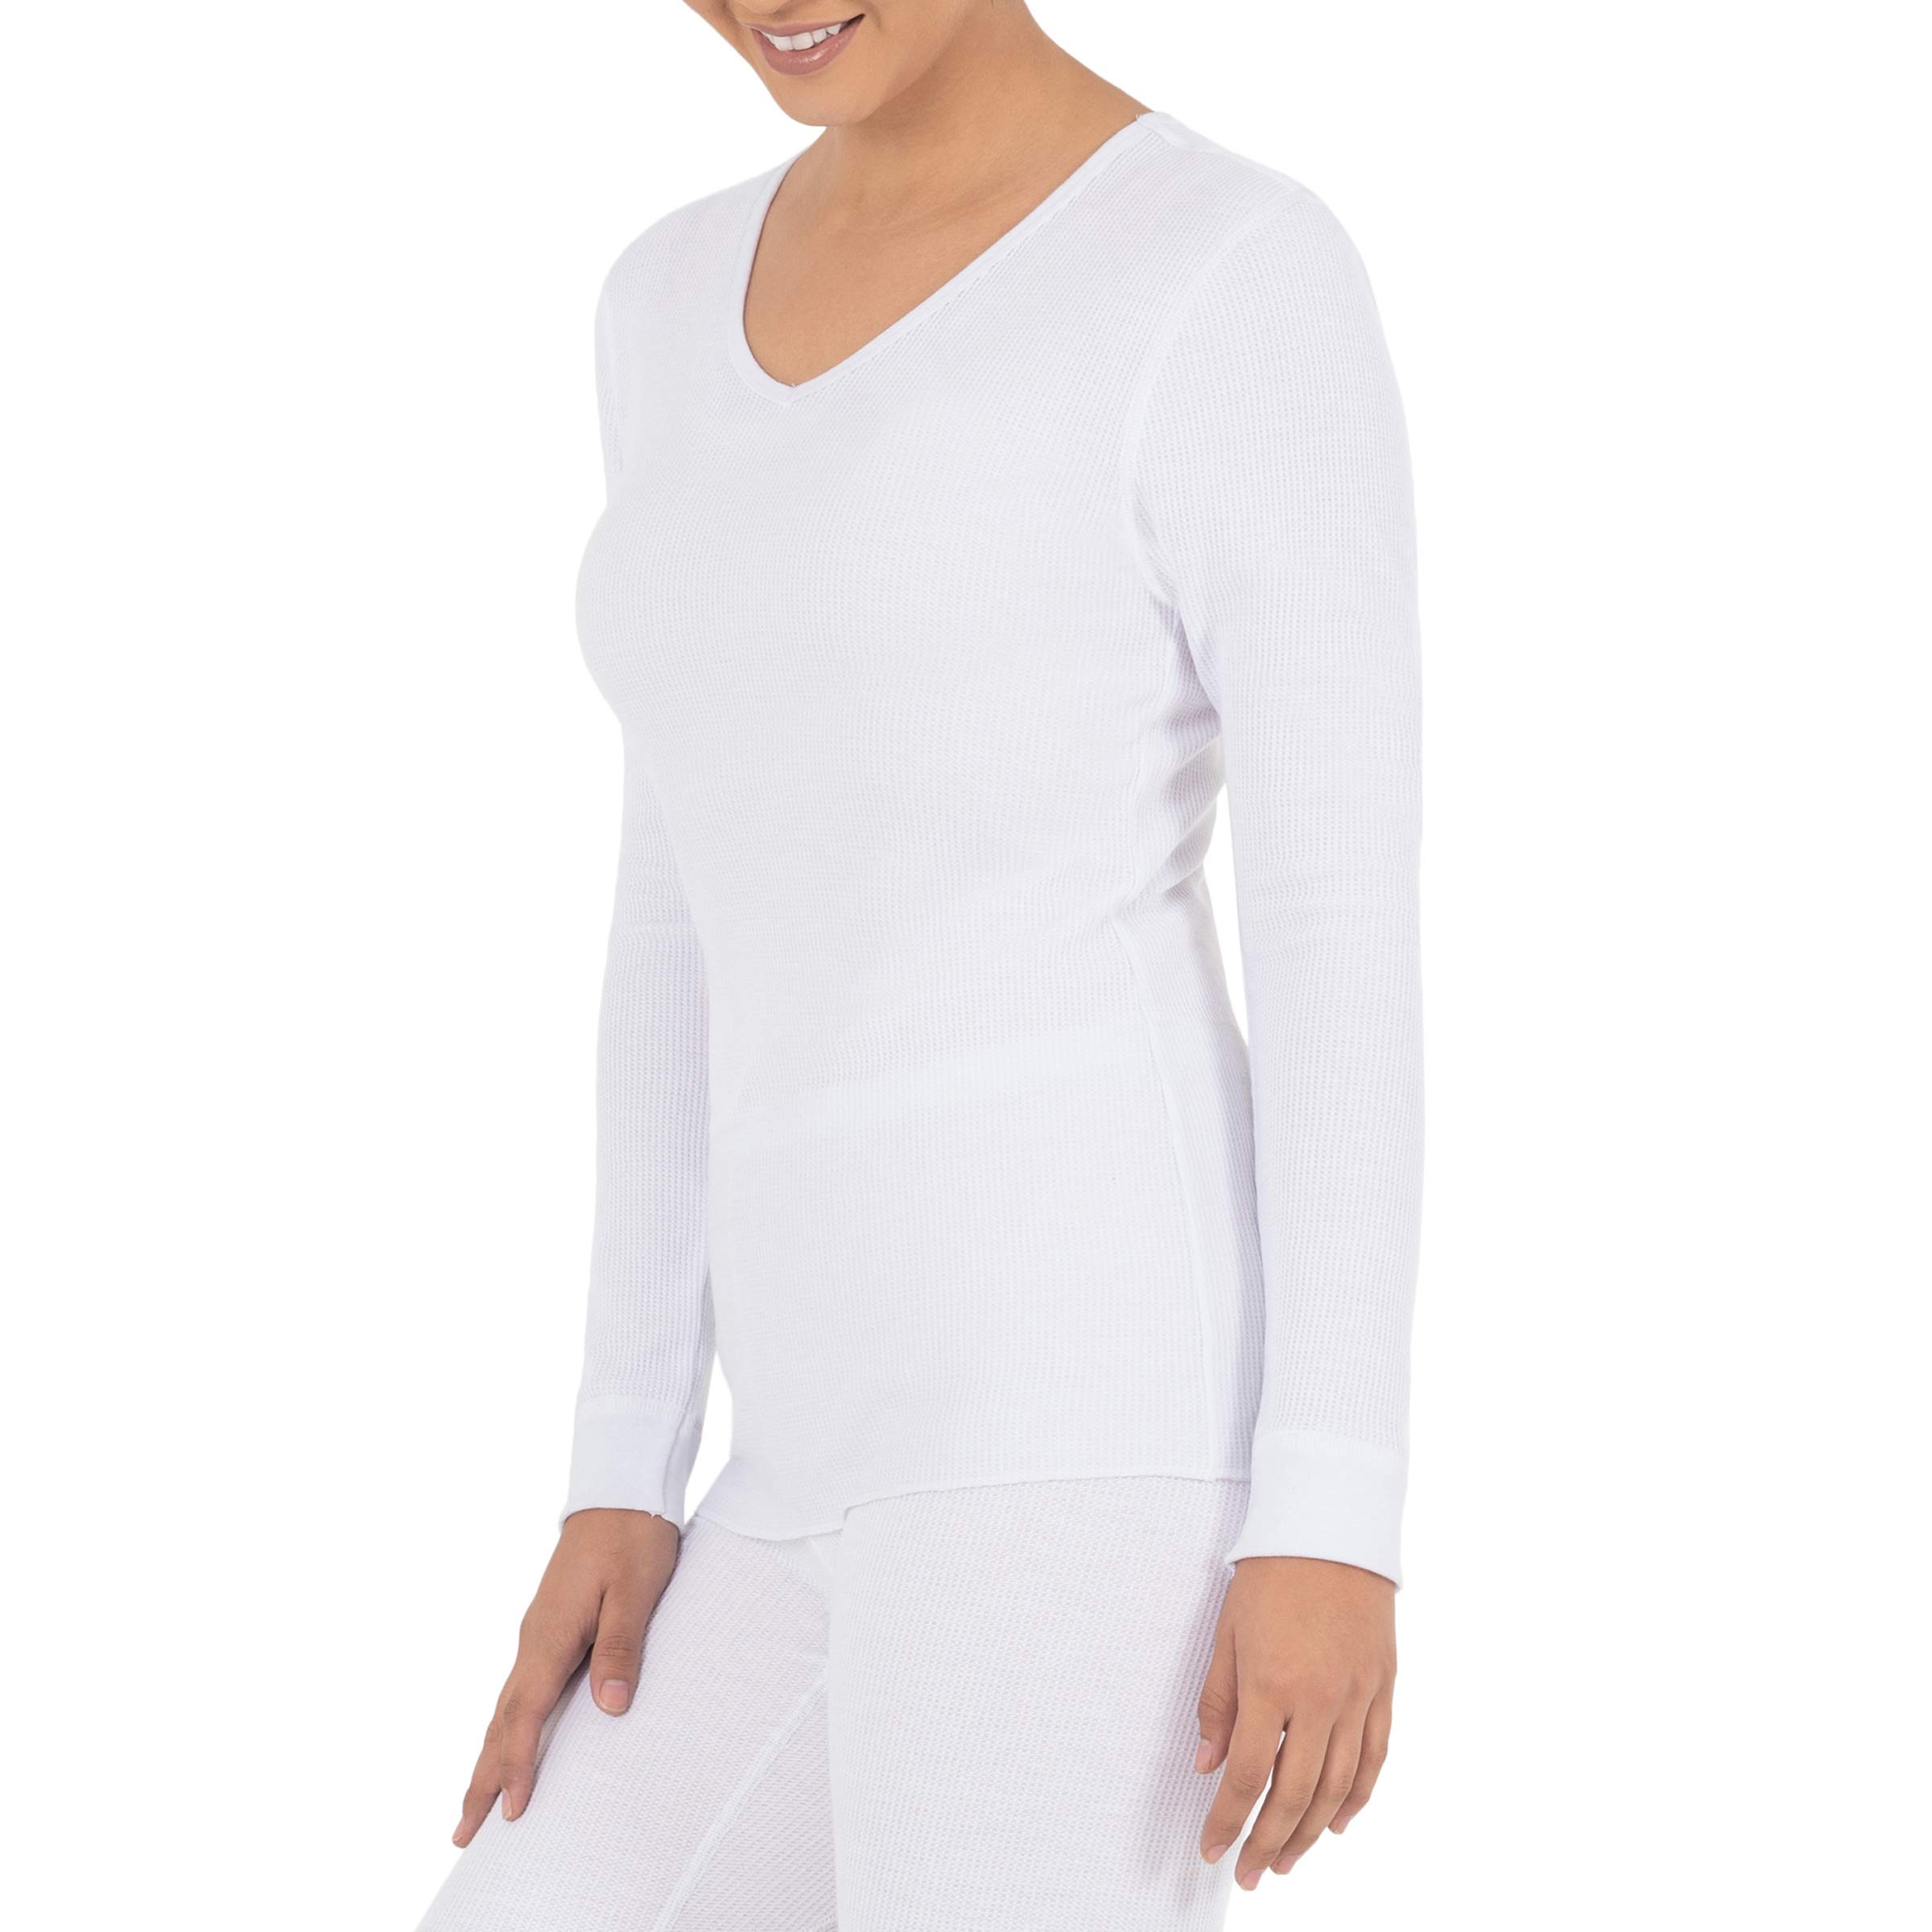 Fruit of the Loom Women's Micro Waffle Thermal V-Neck